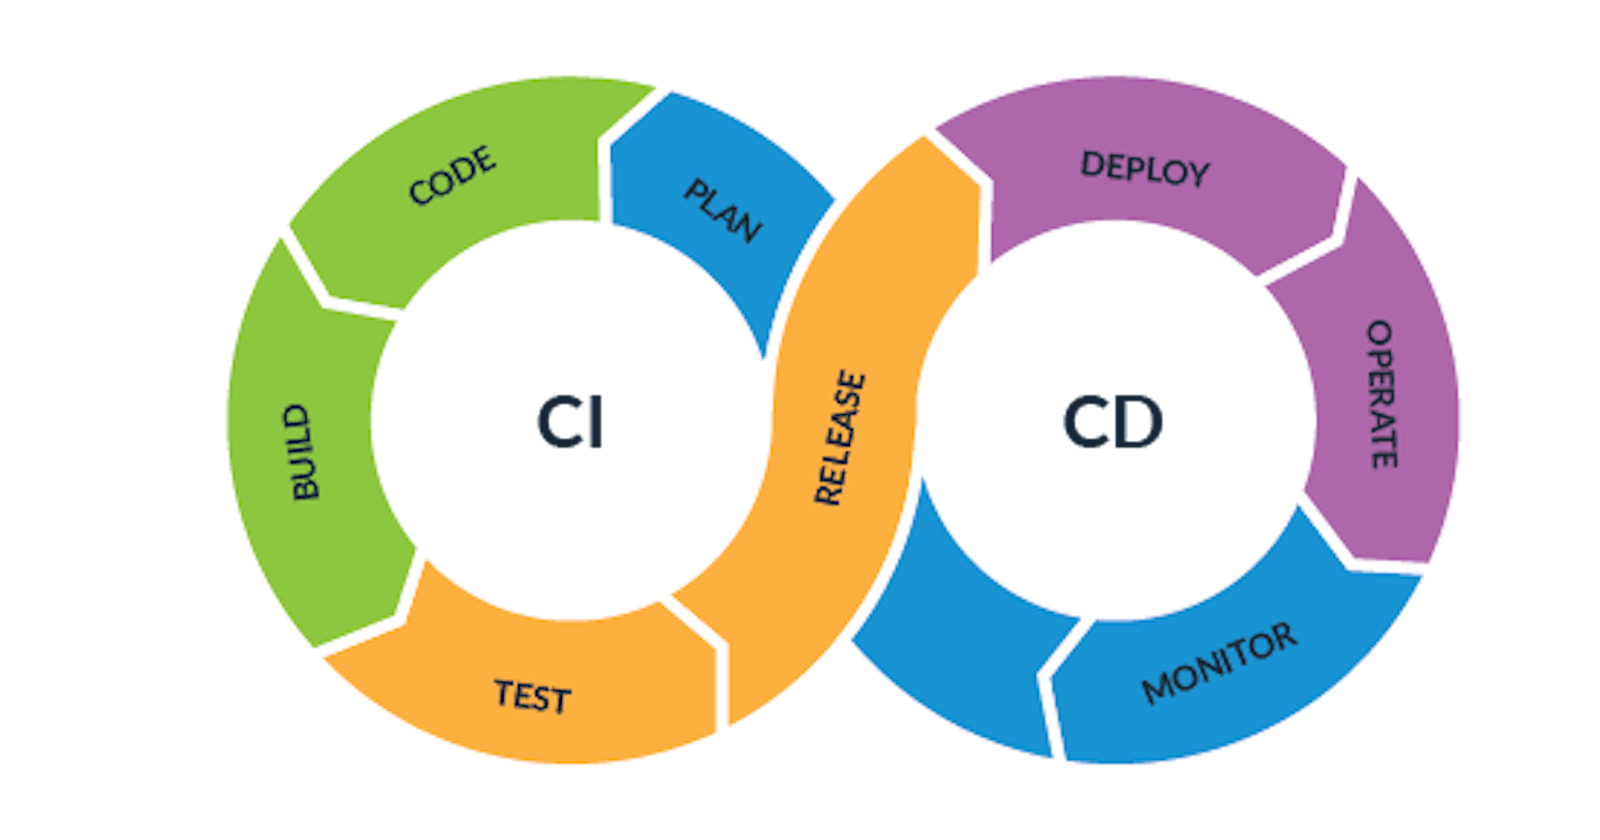 CI/CD in the simplest way